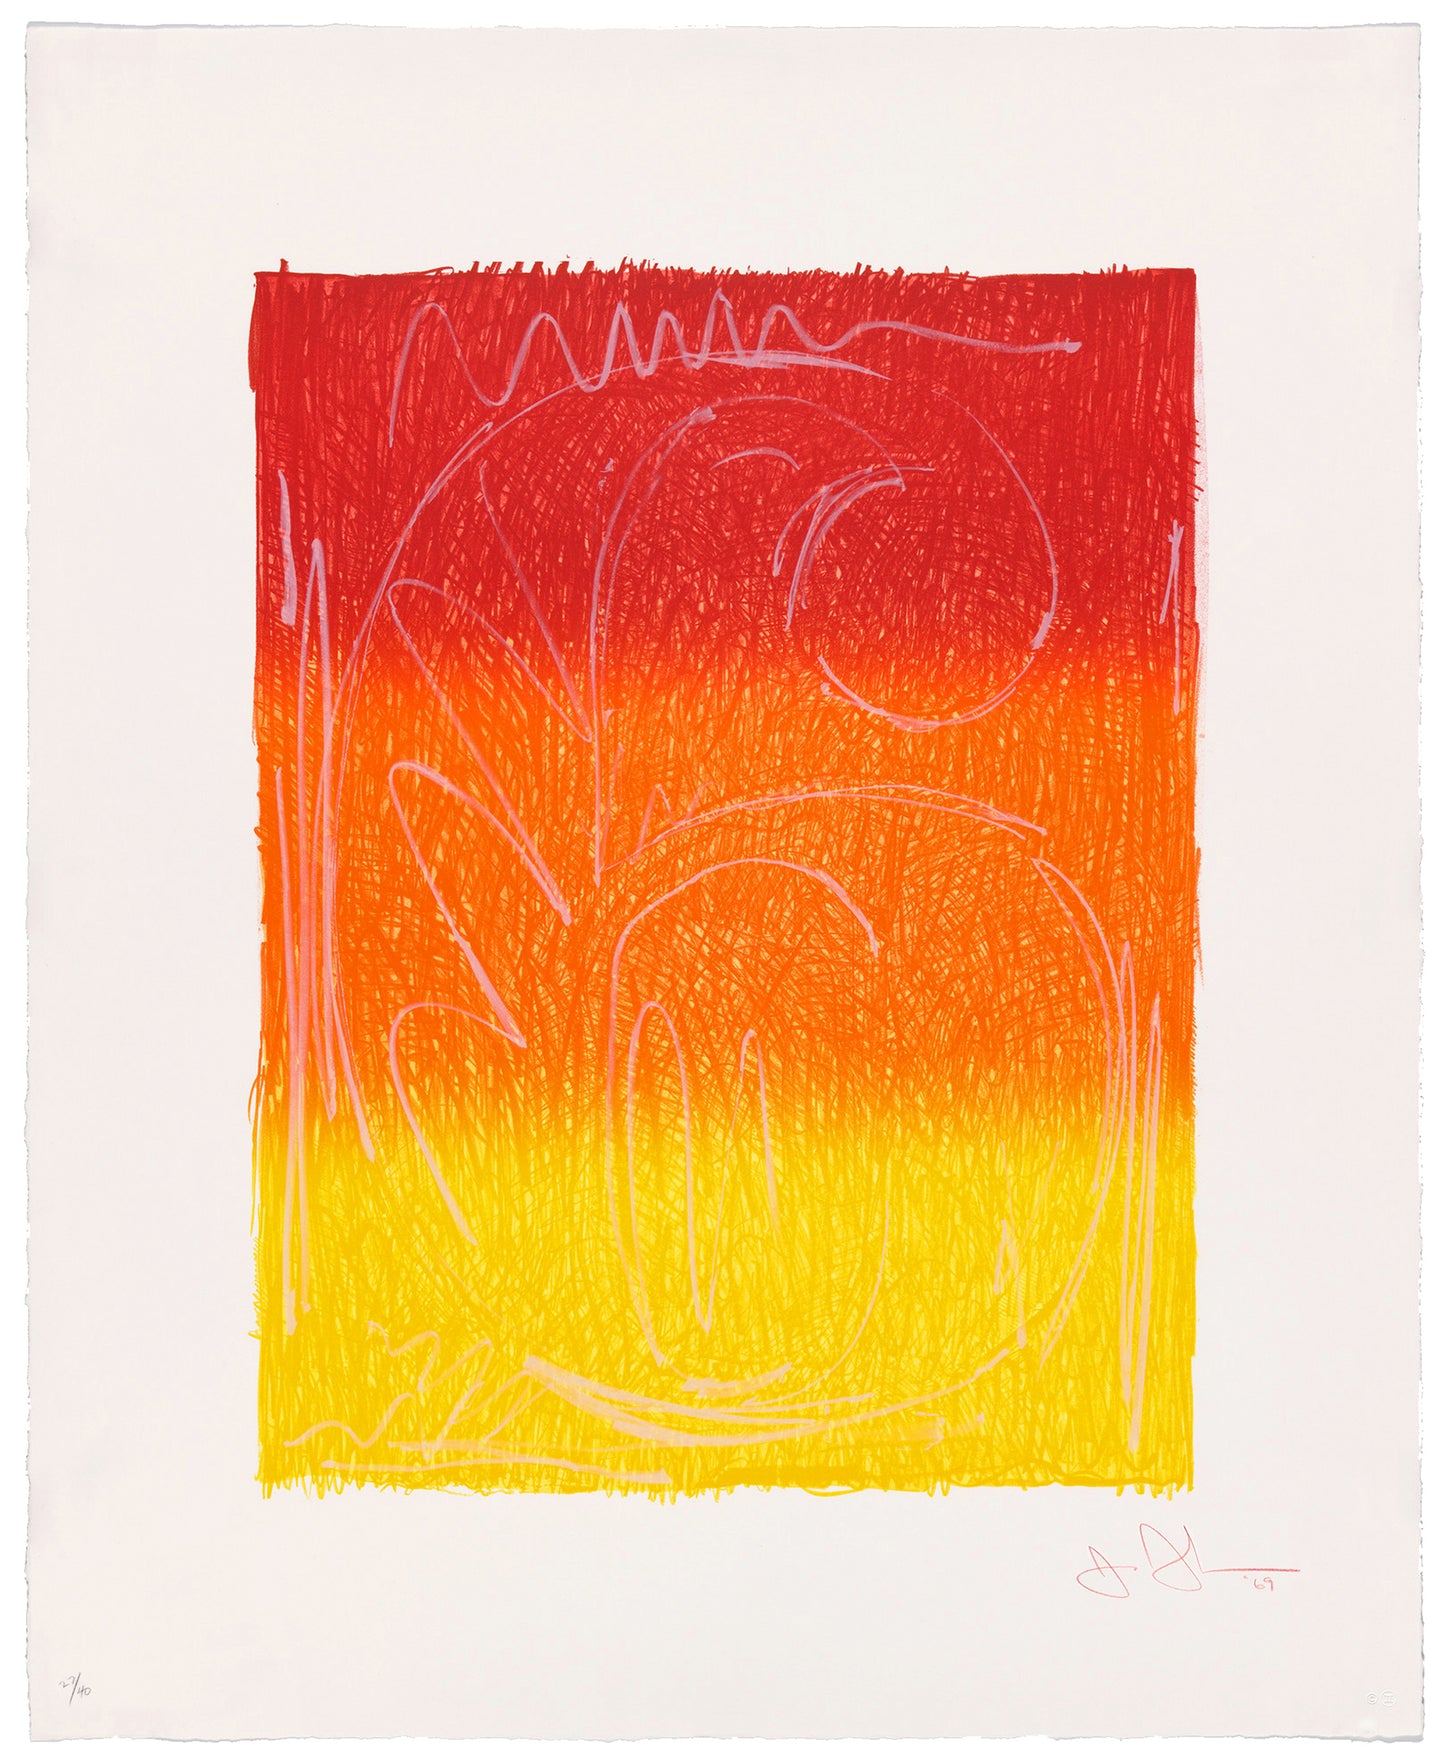 Unframed View Jasper Johns Figure 6 (ULAE 65) 1969 lithograph in colors, on Arjomari paper 